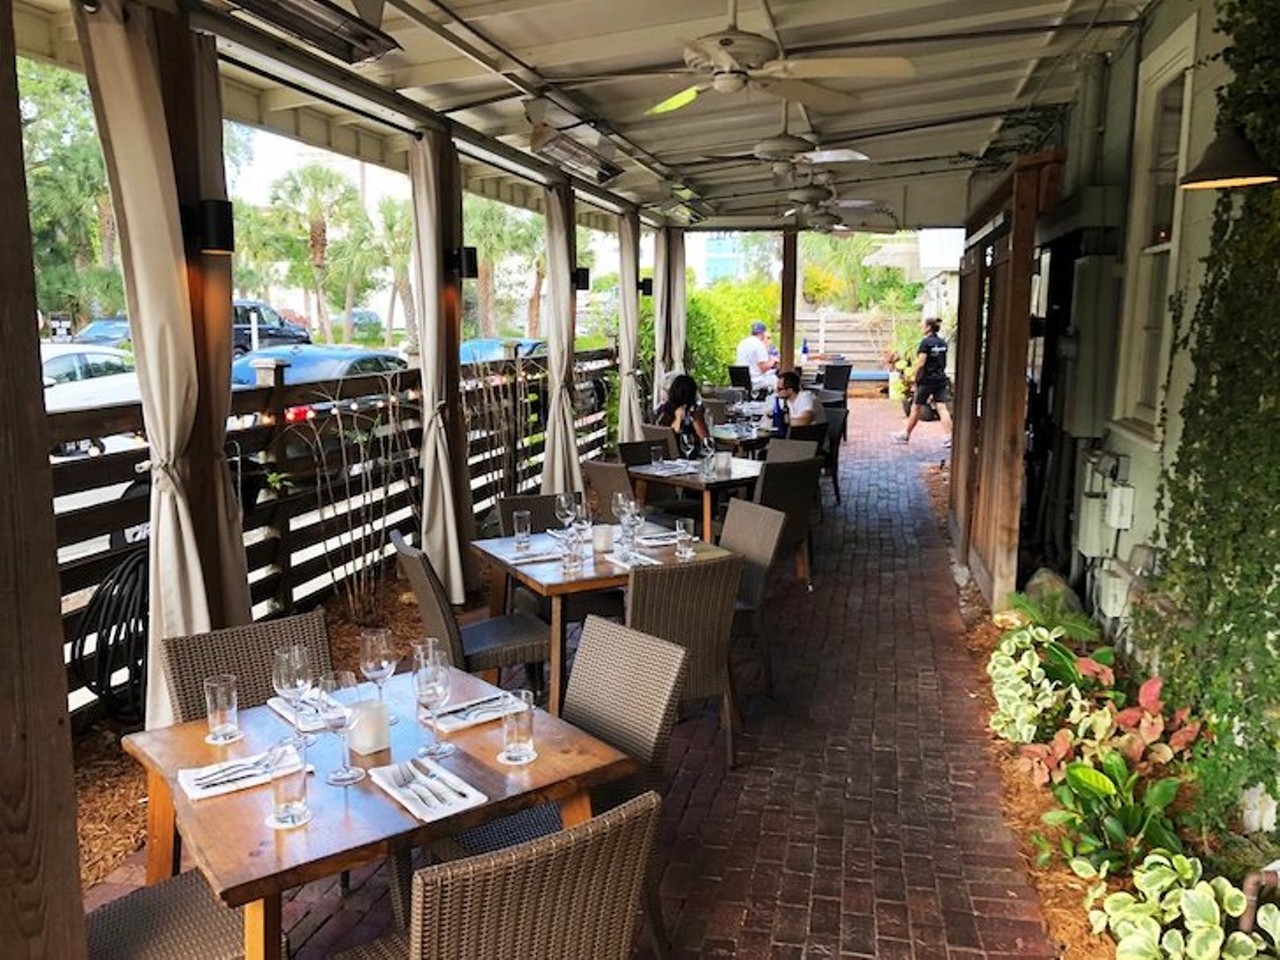 11. Indigenous Restaurant
239 S. Links Ave., Sarasota, (941) 706-4740
&#147;One of the best meals I have had in awhile. Fresh, innovative, and local. Chef is very connected to what he's doing.&#148;- Lisa C. 
Photo via Judi G./Yelp